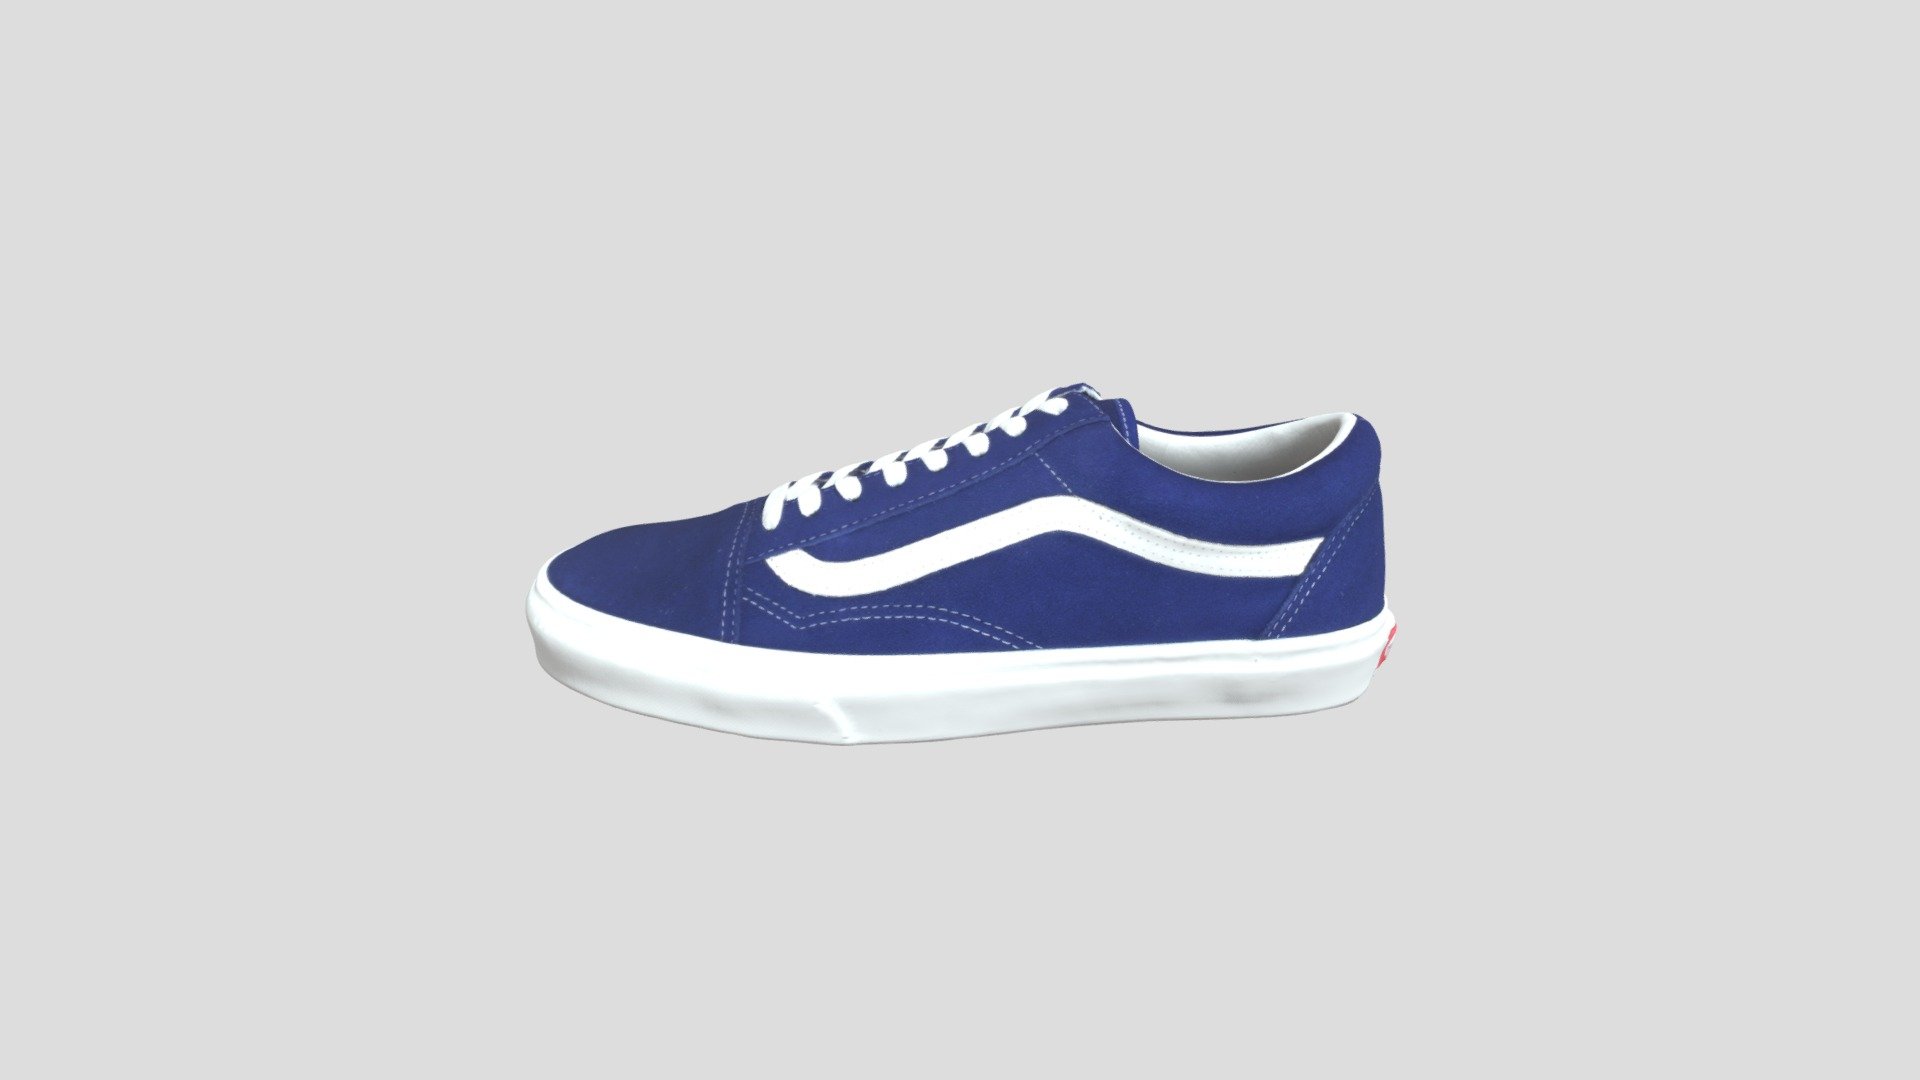 This model was created firstly by 3D scanning on retail version, and then being detail-improved manually, thus a 1:1 repulica of the original
PBR ready
Low-poly
4K texture
Welcome to check out other models we have to offer. And we do accept custom orders as well :) - Vans Old Skool 板鞋 蓝色_VN0A4U3BXF7 - Buy Royalty Free 3D model by TRARGUS 3d model